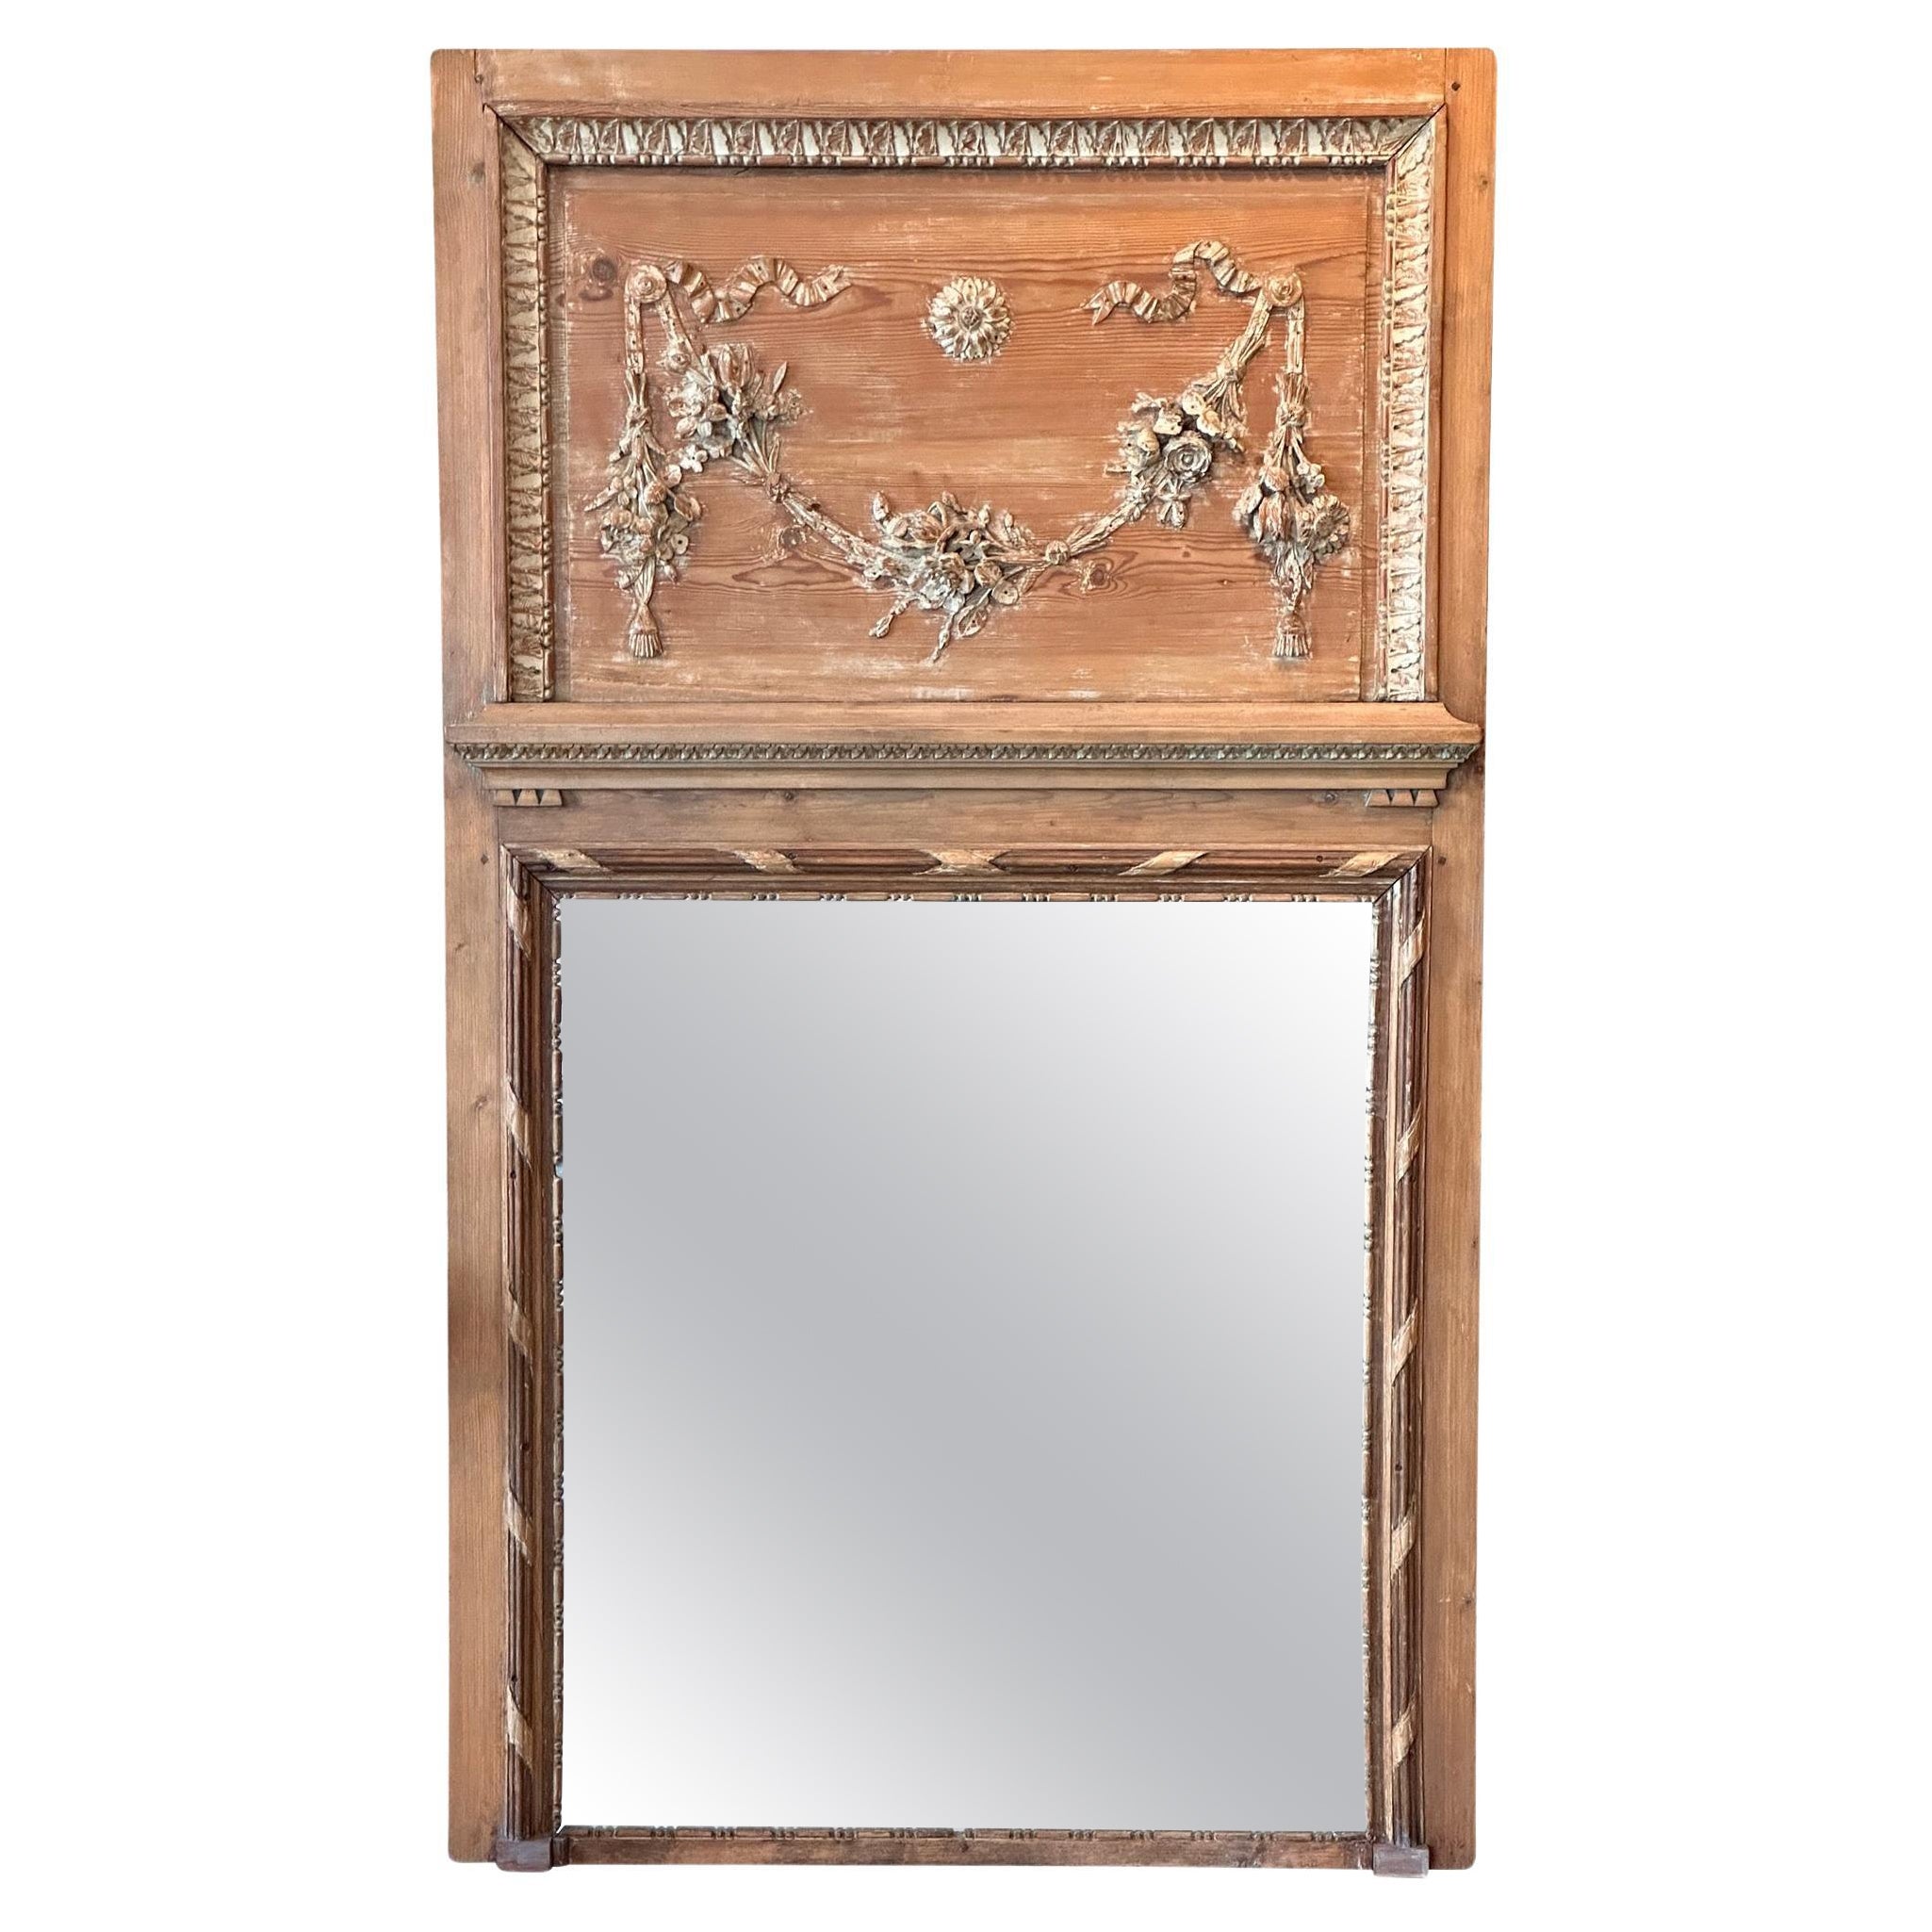 19th Century French Carved Pine Trumeau Mirror